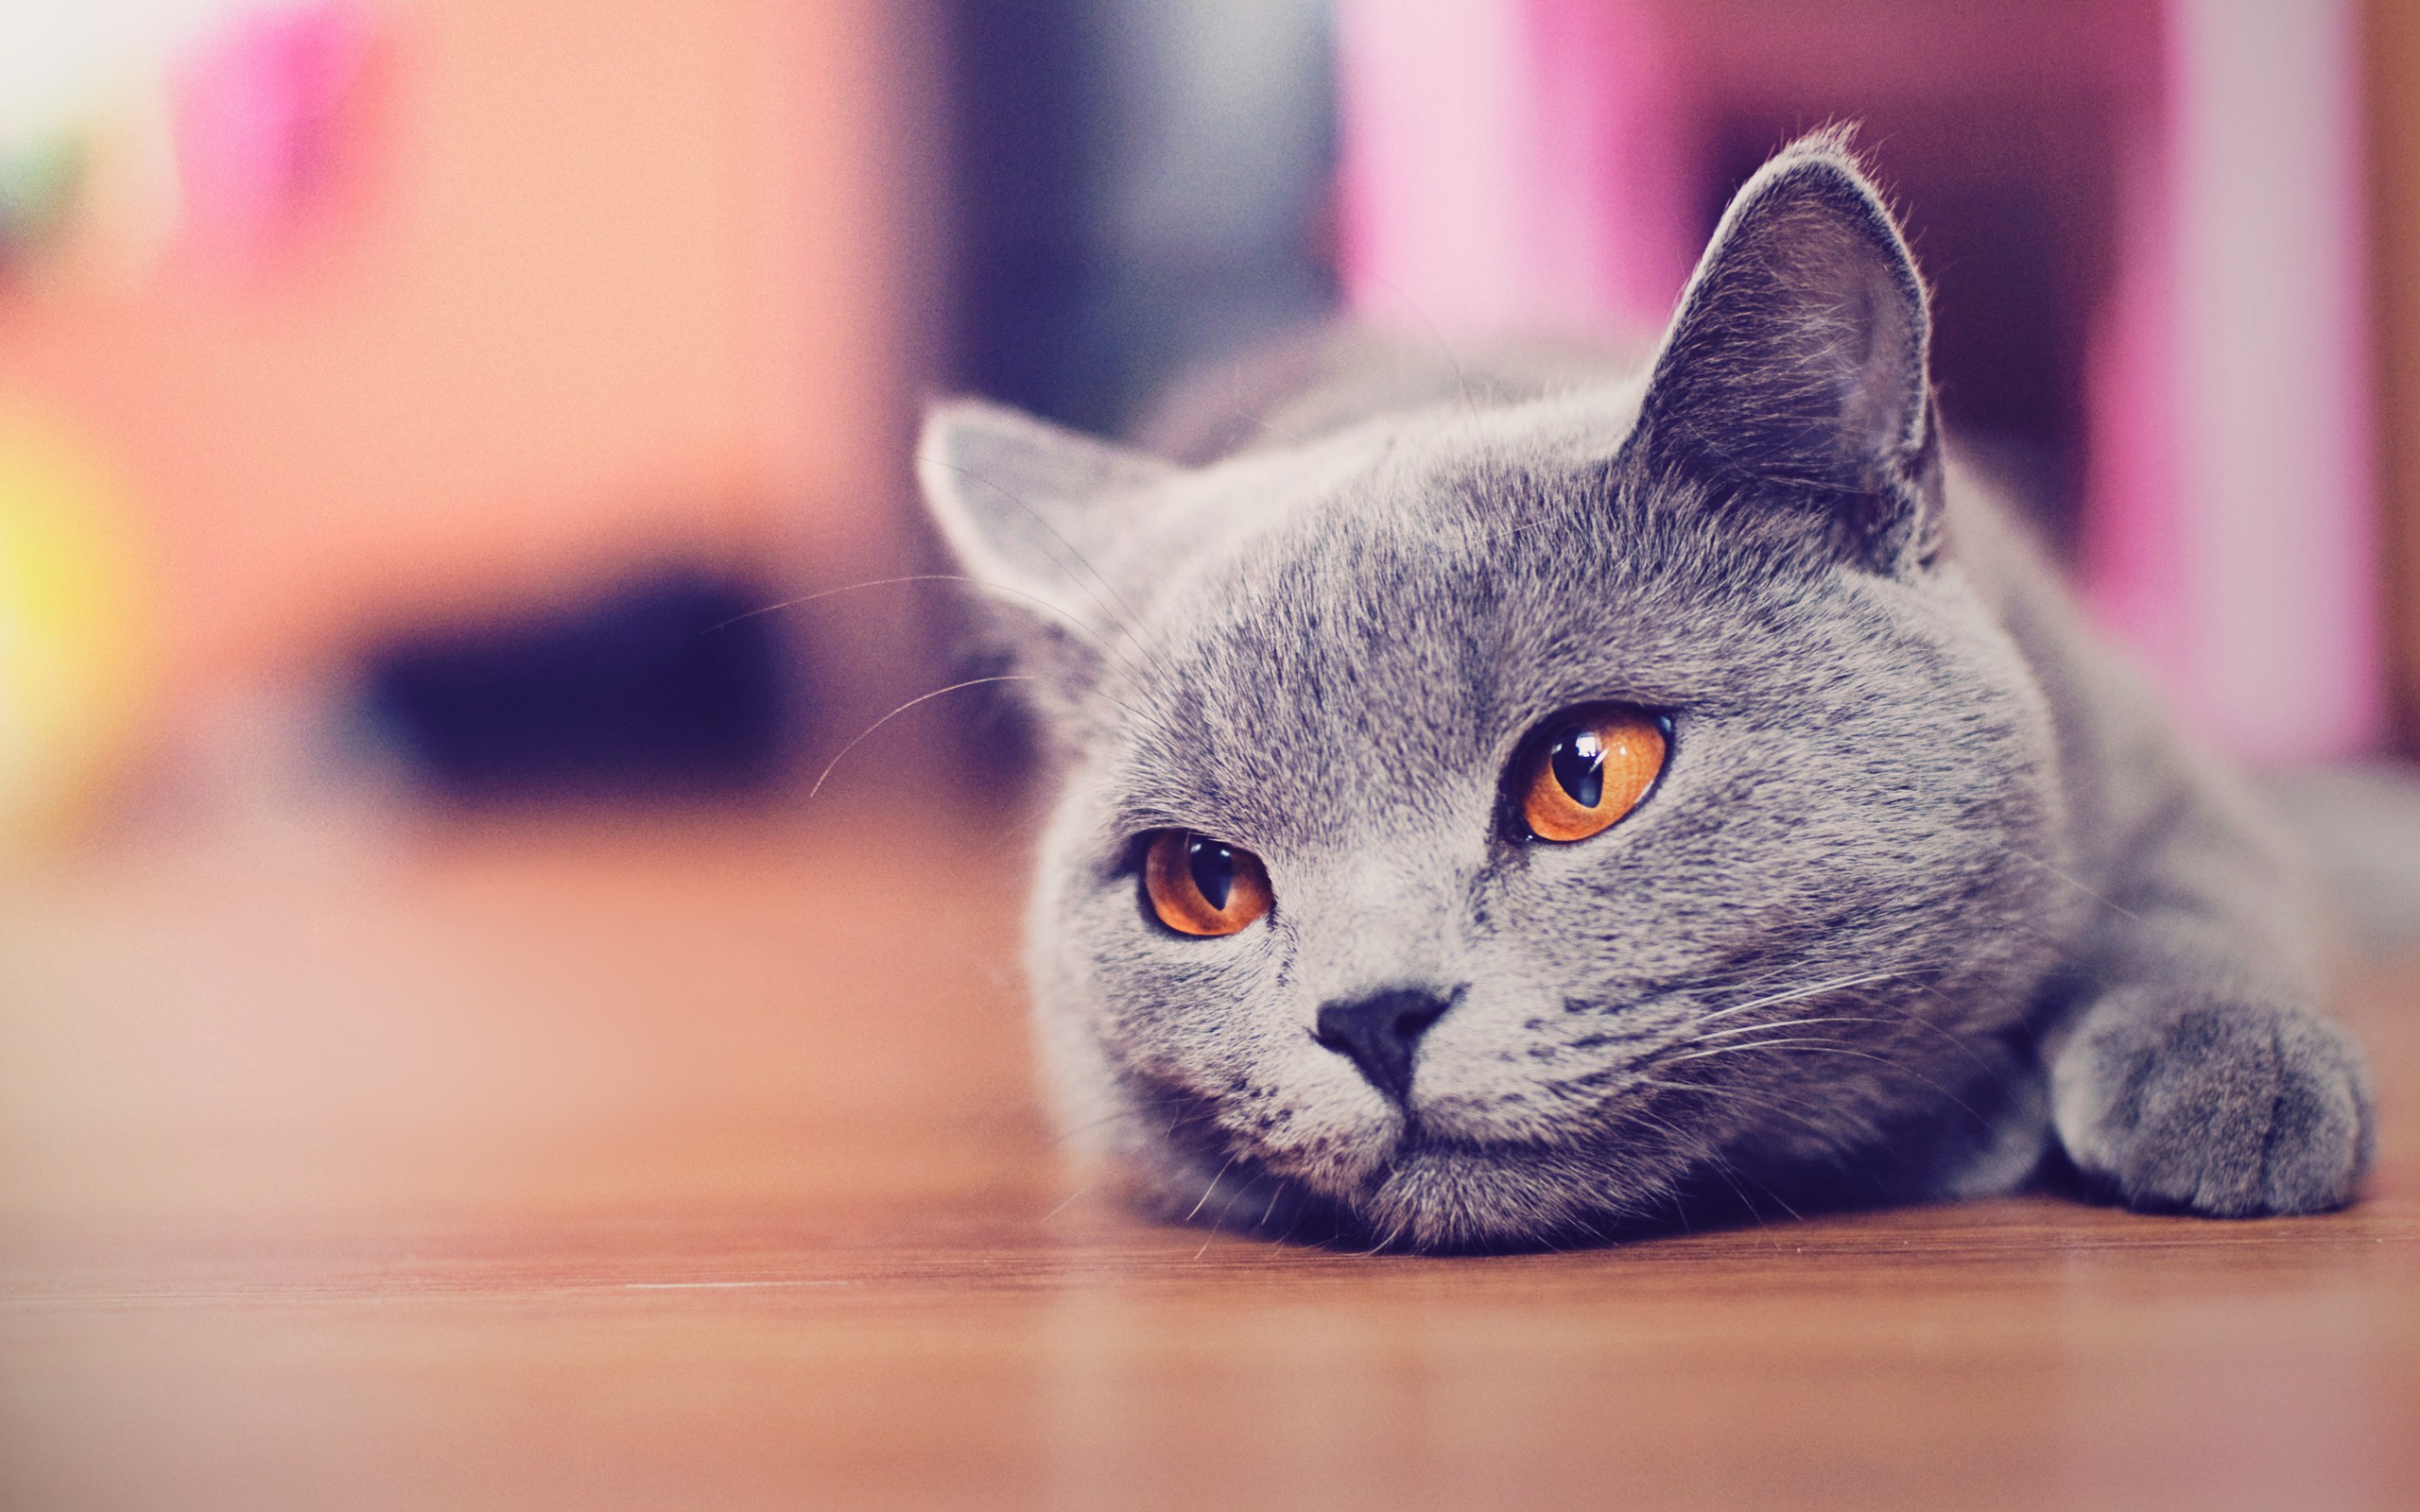 General 2560x1600 cats animals Russian Blue blurred mammals animal eyes on the floor indoors closeup